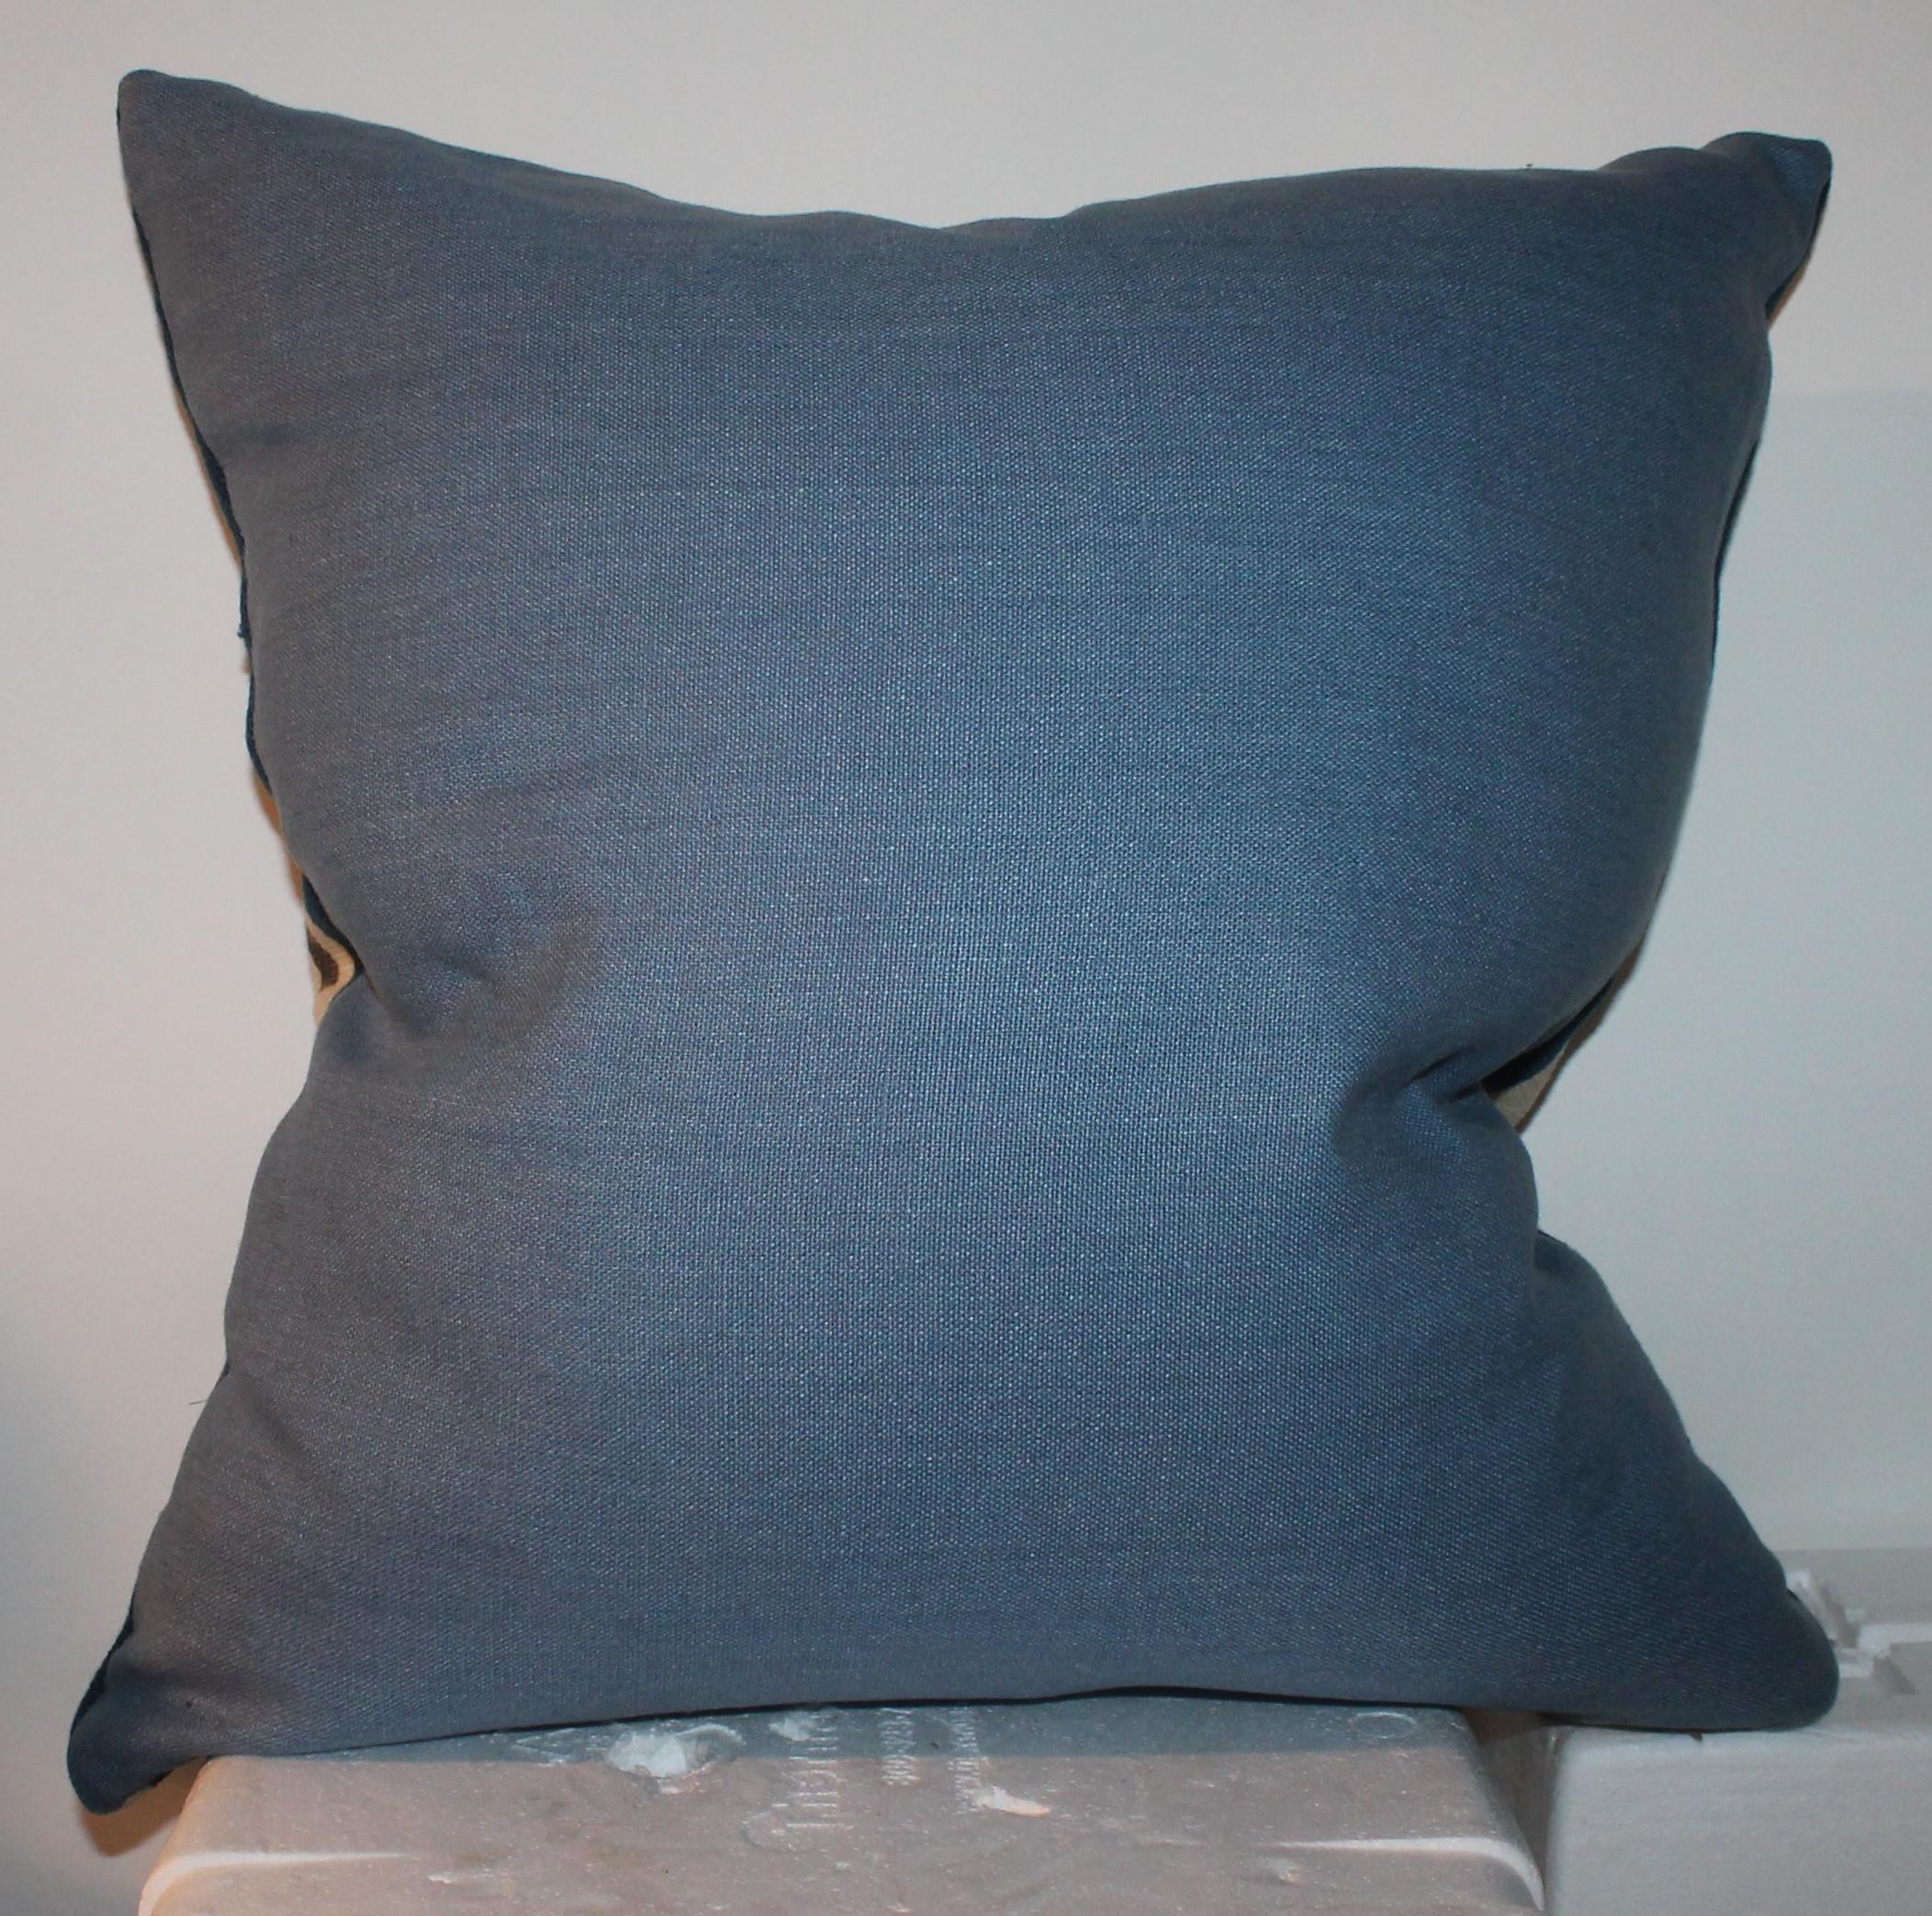 Hand-Crafted Early Tex Coco Indian Weaving Pillow For Sale